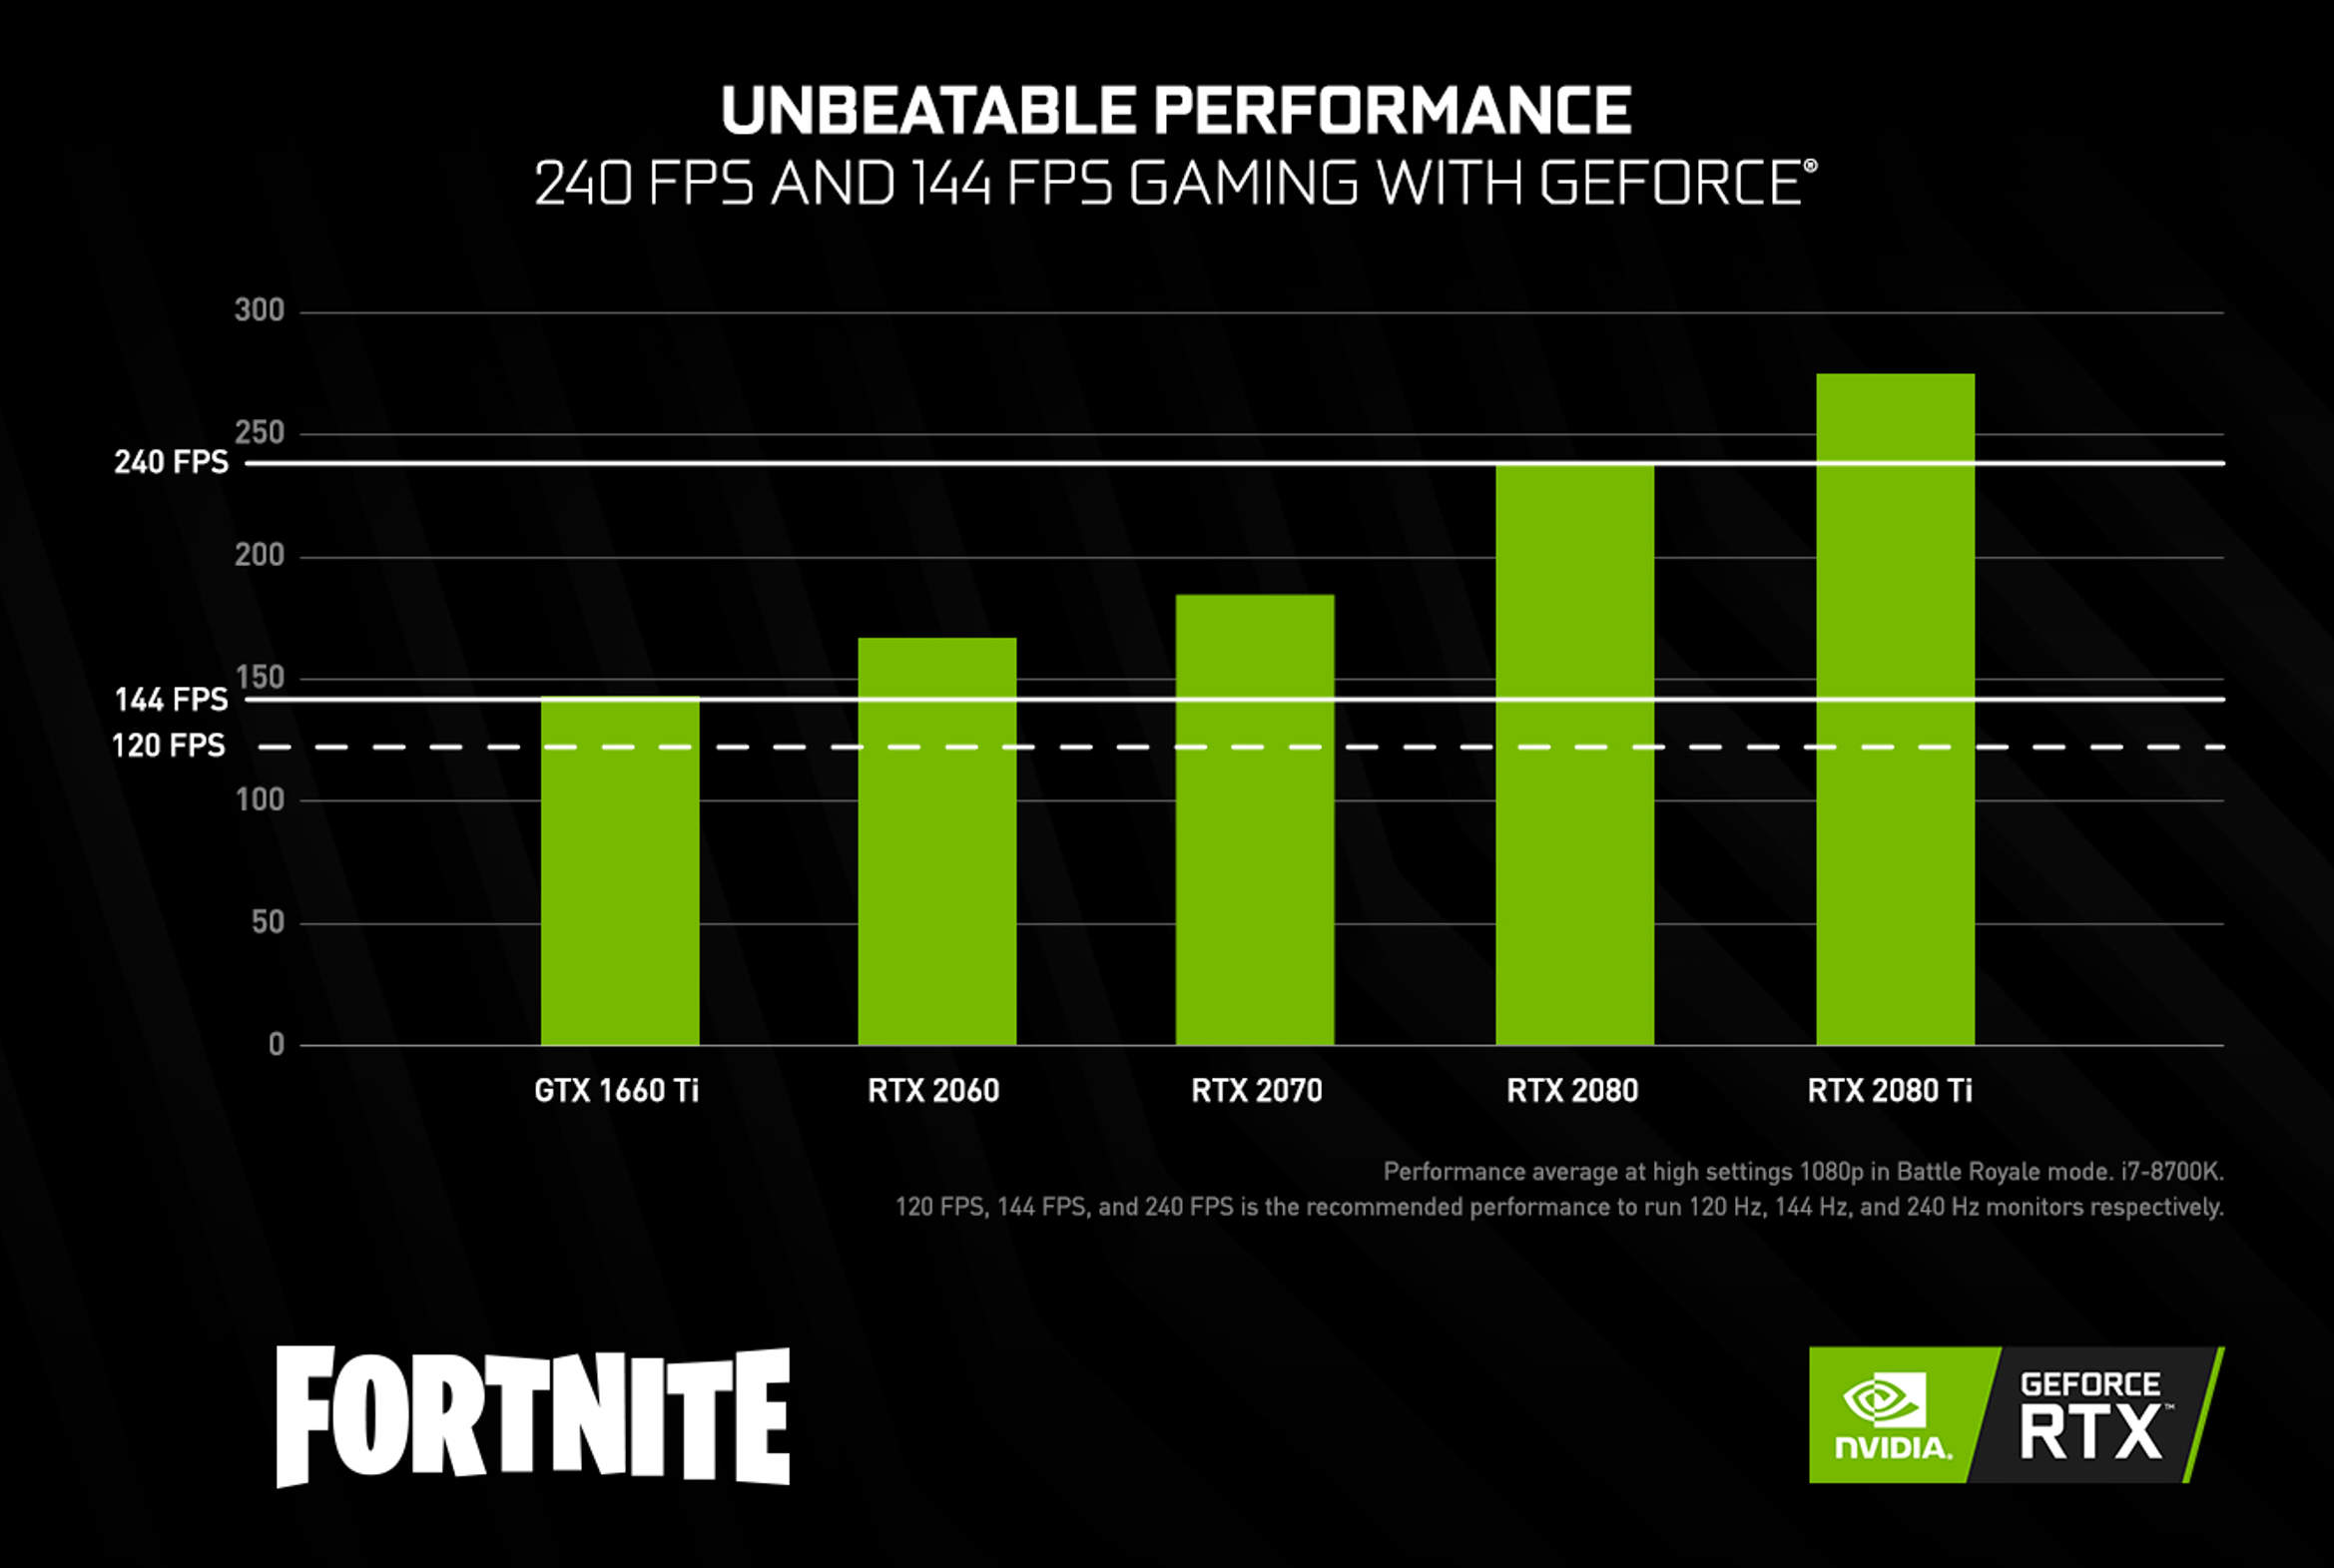 Average Fps For Fortnite On 2070 Unlock Your Full Potential How Higher Frame Rates Can Give You An Edge In Battle Royale Games